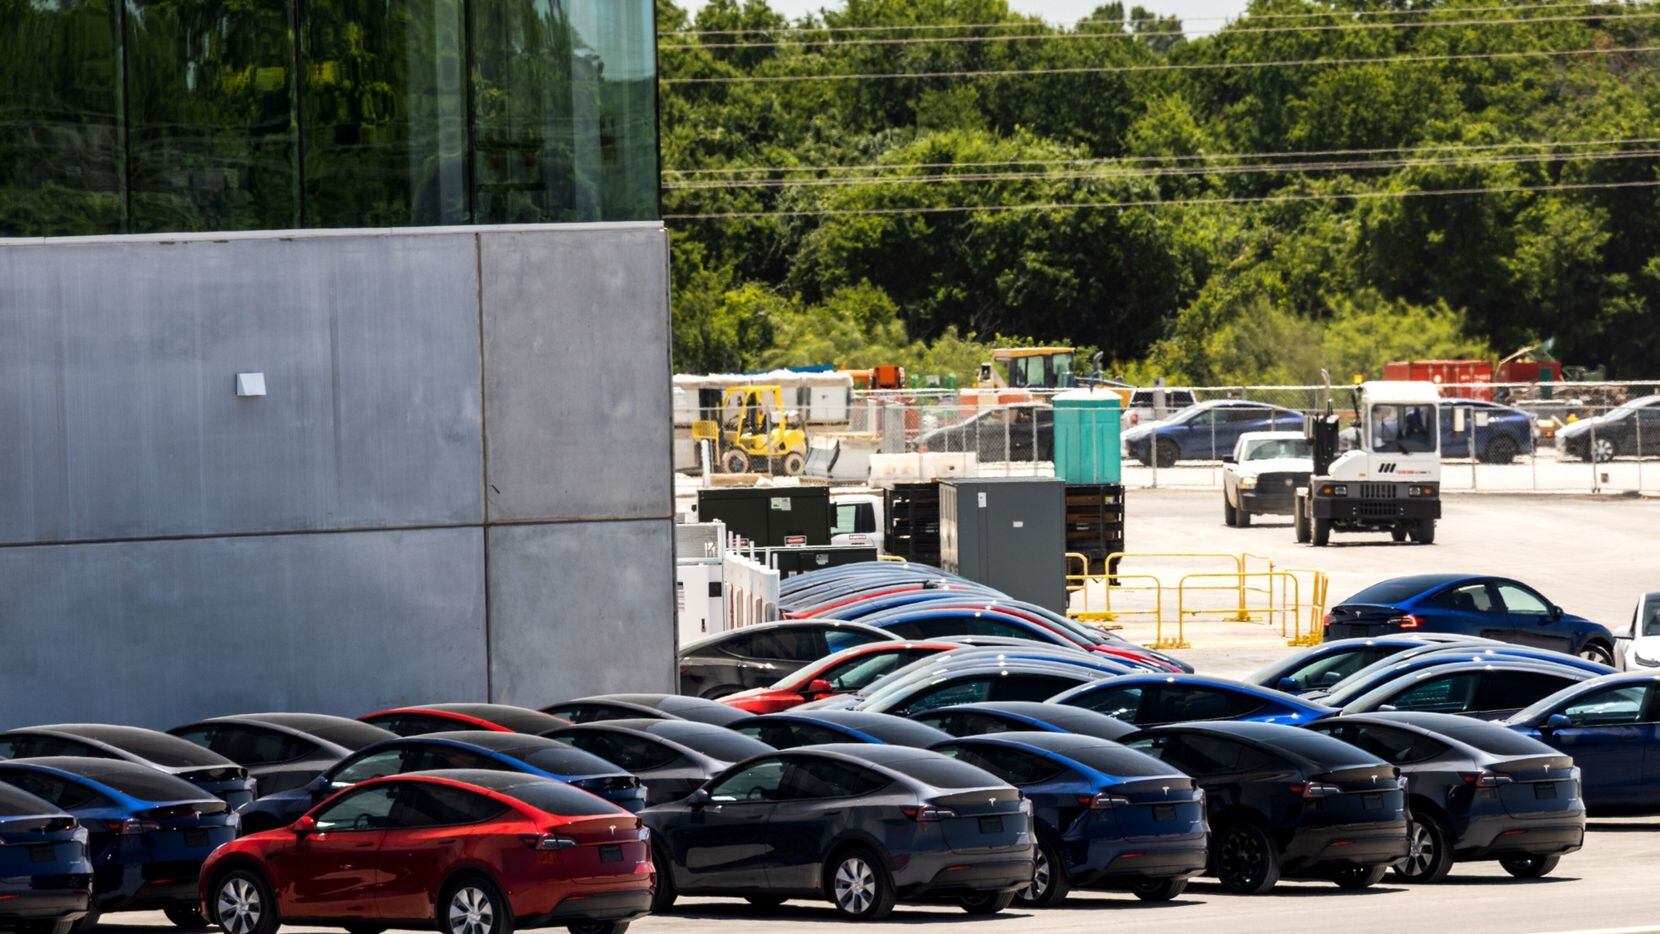 Electric vehicles parked outside the Tesla Gigafactory in Austin, Texas, US, on June 23, 2022.